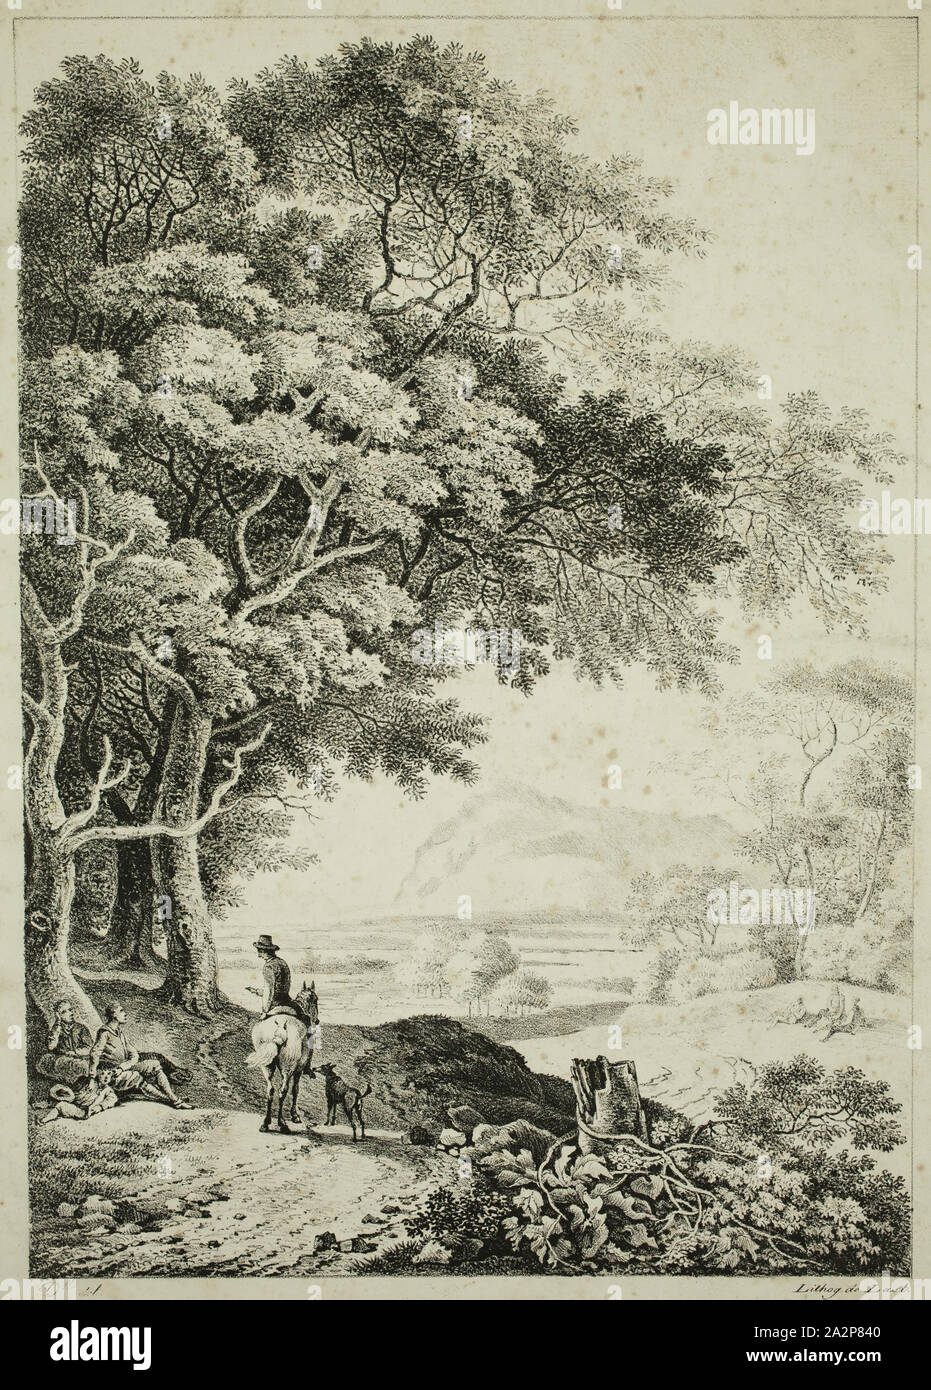 Louis Bacler d'Albe, French, 1762-1824, Untitled, c. 1820, lithograph printed in black ink on wove paper, Image: 13 1/8 x 9 1/4 in. (33.3 x 23.5 cm Stock Photo